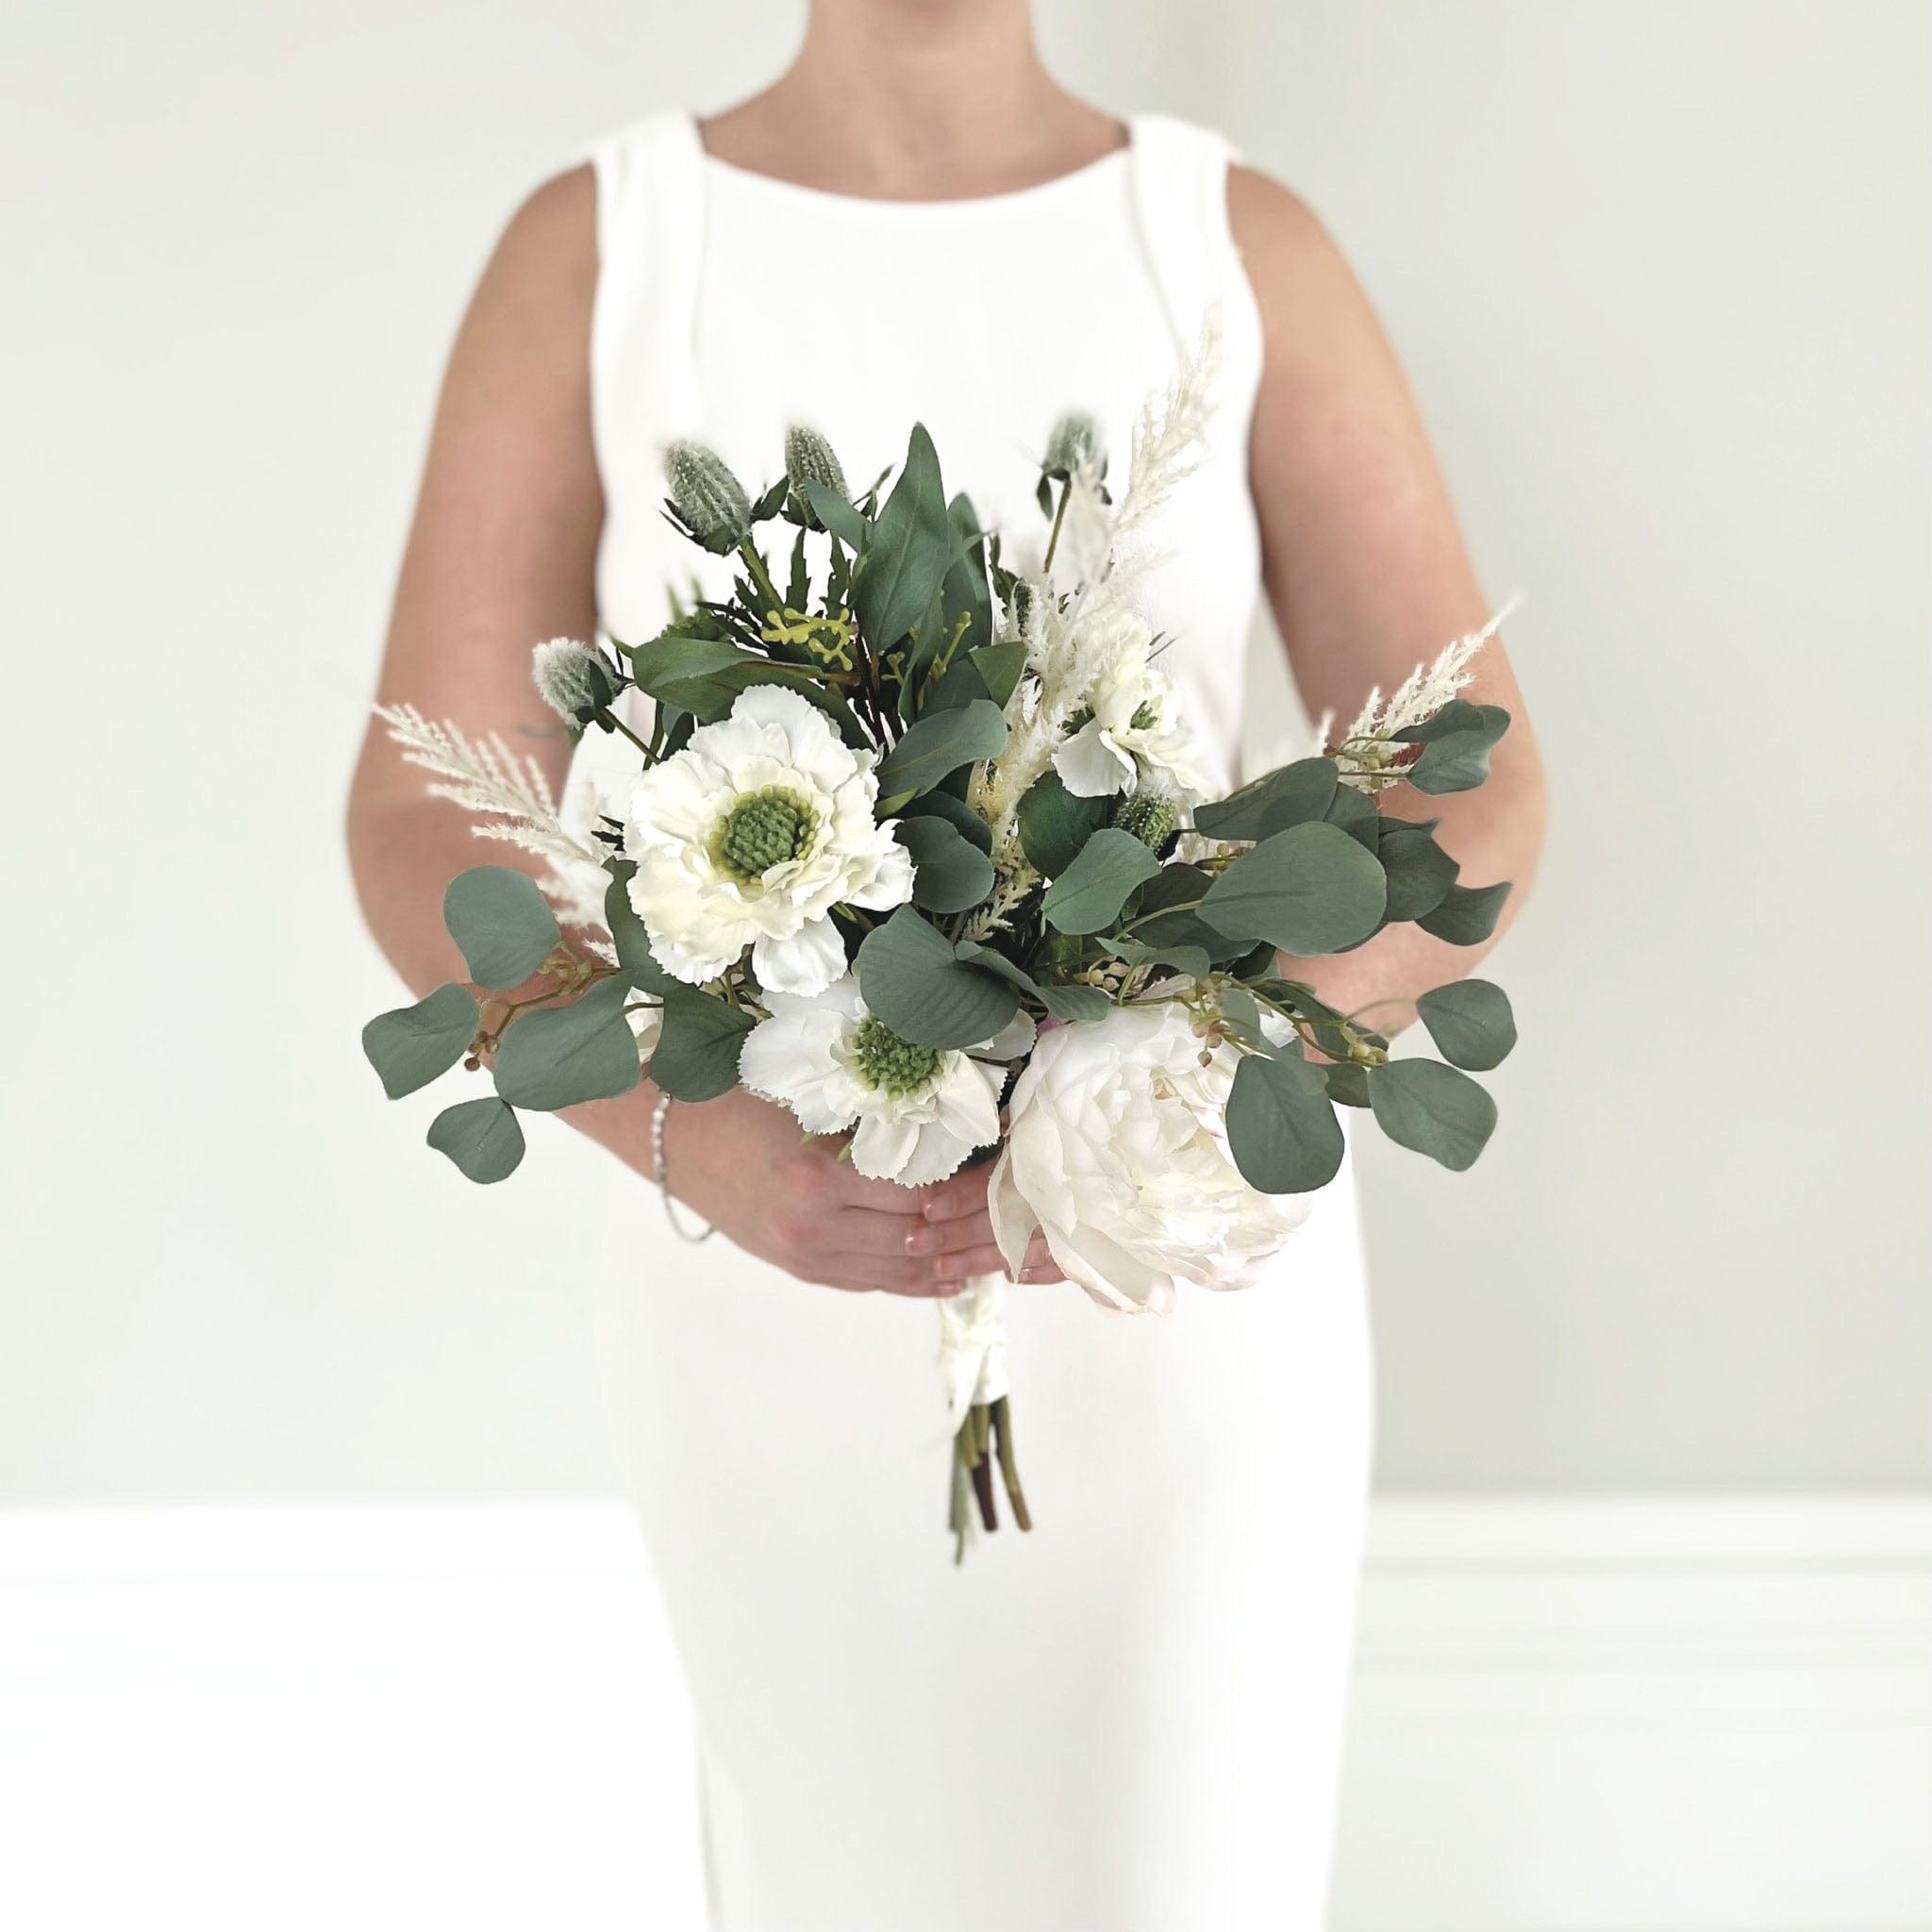 Artificial flowers luxury faux silk westwood white protea silk wedding bridesmaid bouquet lifelike realistic faux flowers from Amaranthine Blooms UK